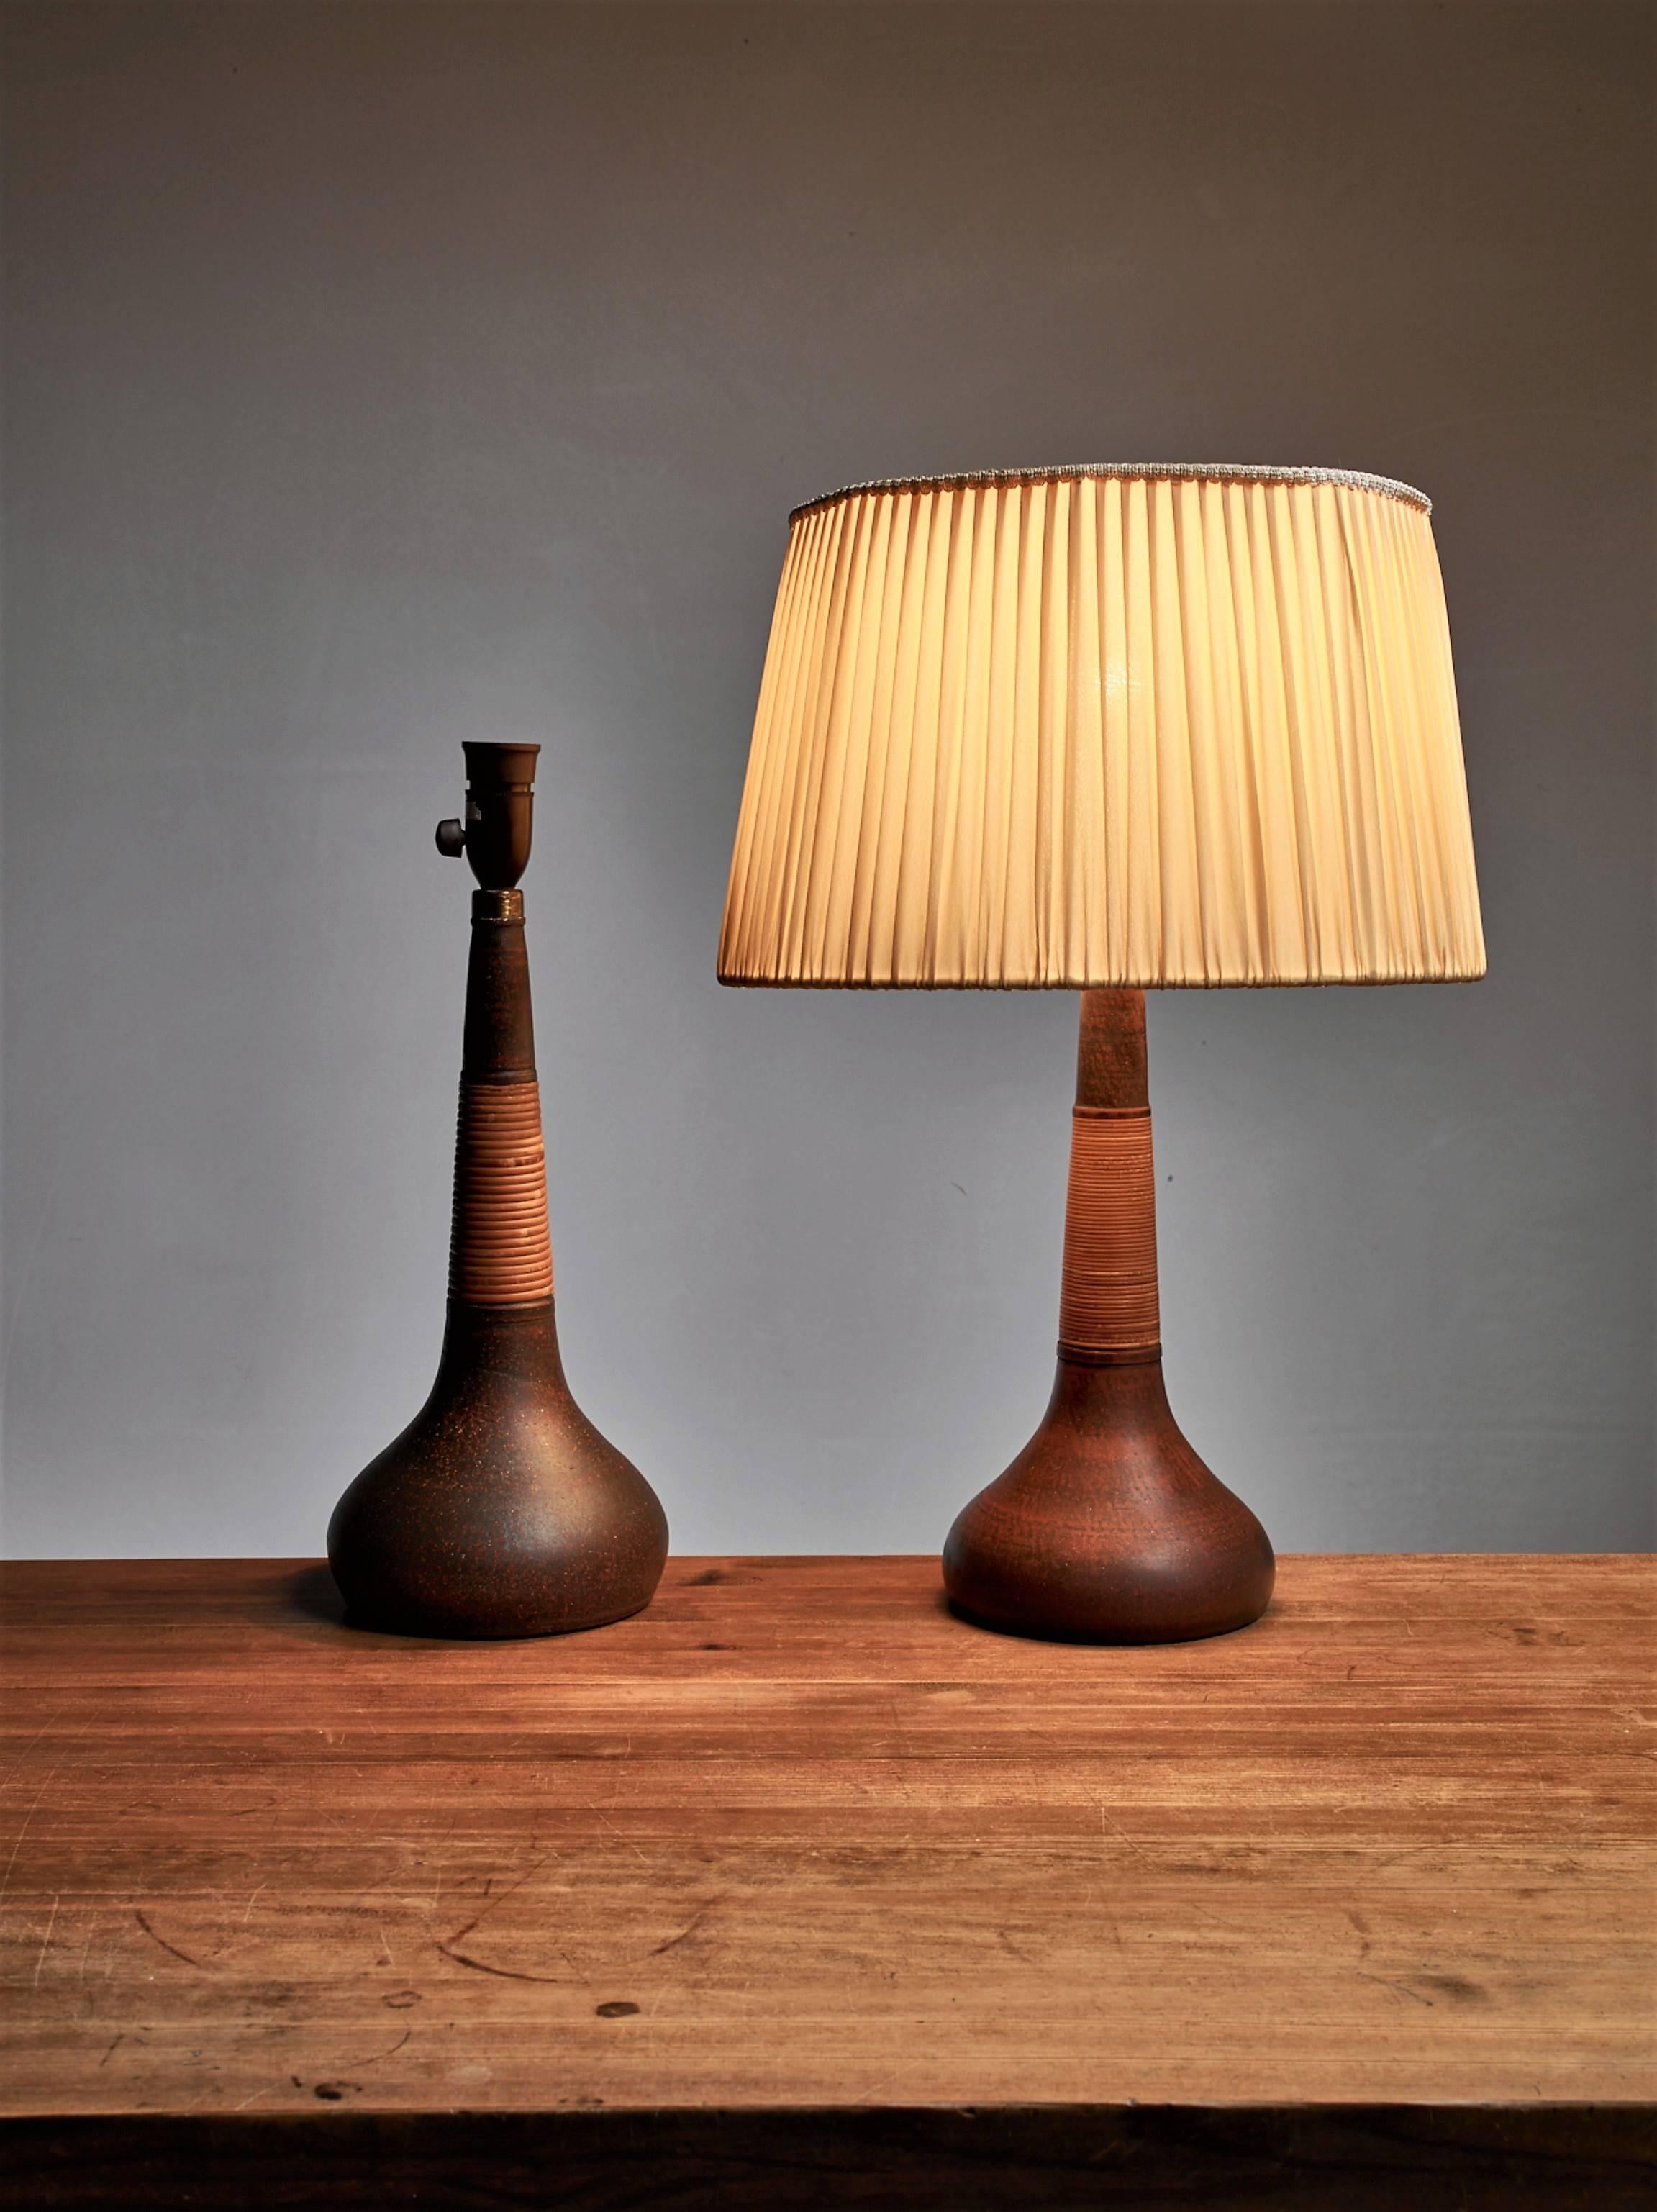 A pair of table lamps by Nils Kähler. The lamps are made of brown ceramic, partly wrapped with rattan/bast.
Marked by Kähler and Le Klint underneath. The measurements stated are of the base.

* This piece is offered to you by Bloomberry, Amsterdam *